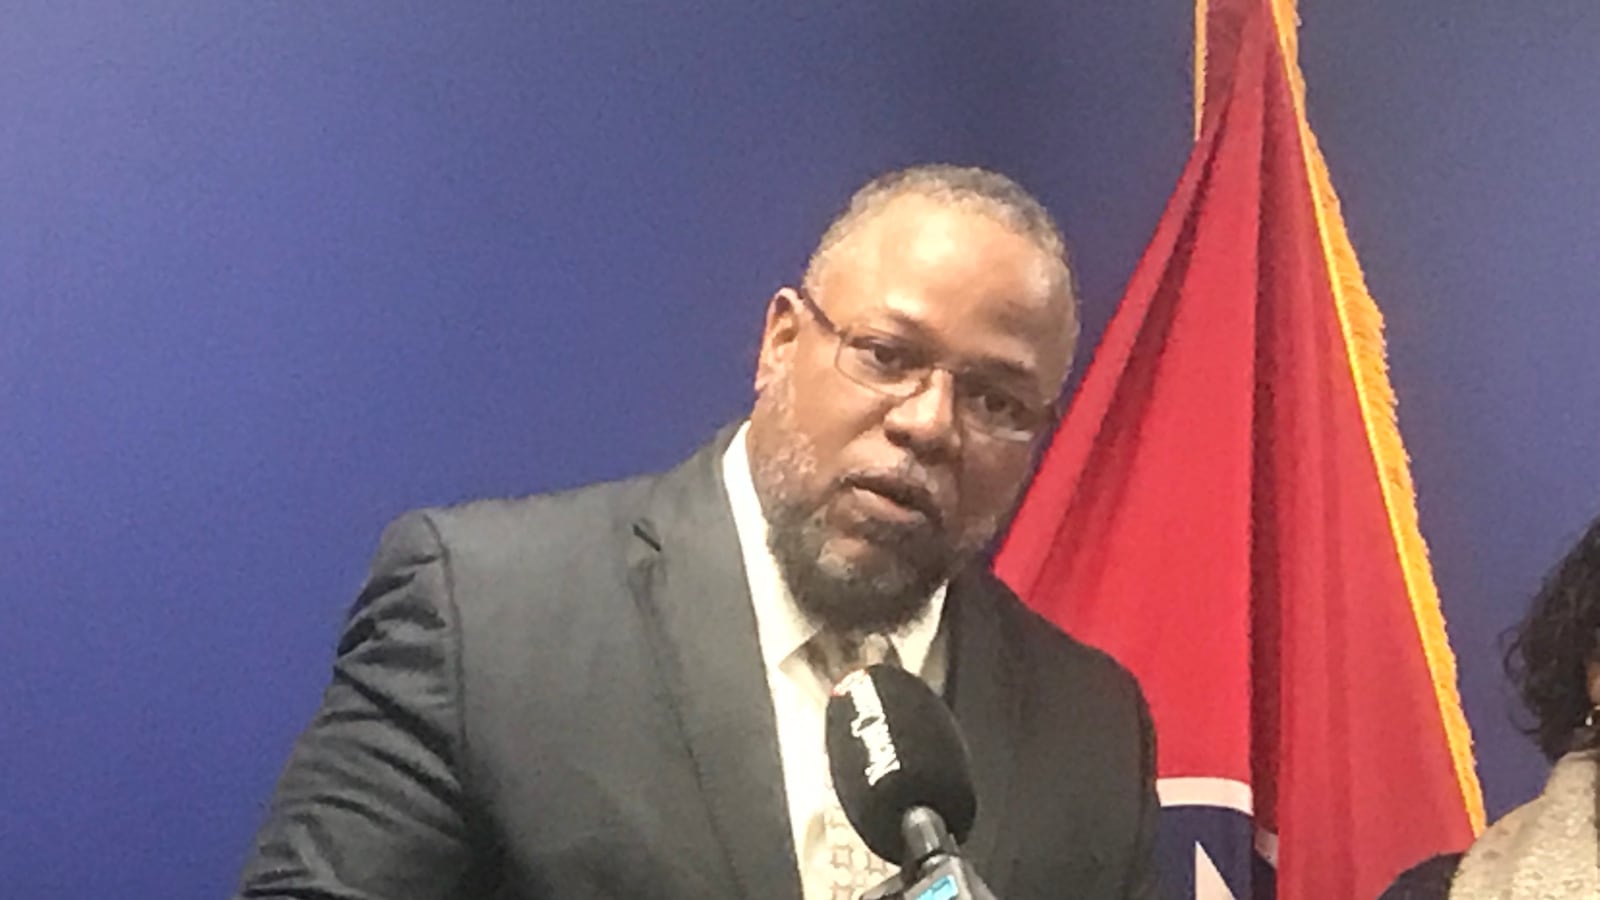 Rep. Antonio Parkinson speaks at a press conference at the State Capitol in April. On Thursday, the Memphis Democrat criticized the state Education Department's guidance to school districts for informing parents that certain student groups in their schools are underperforming.